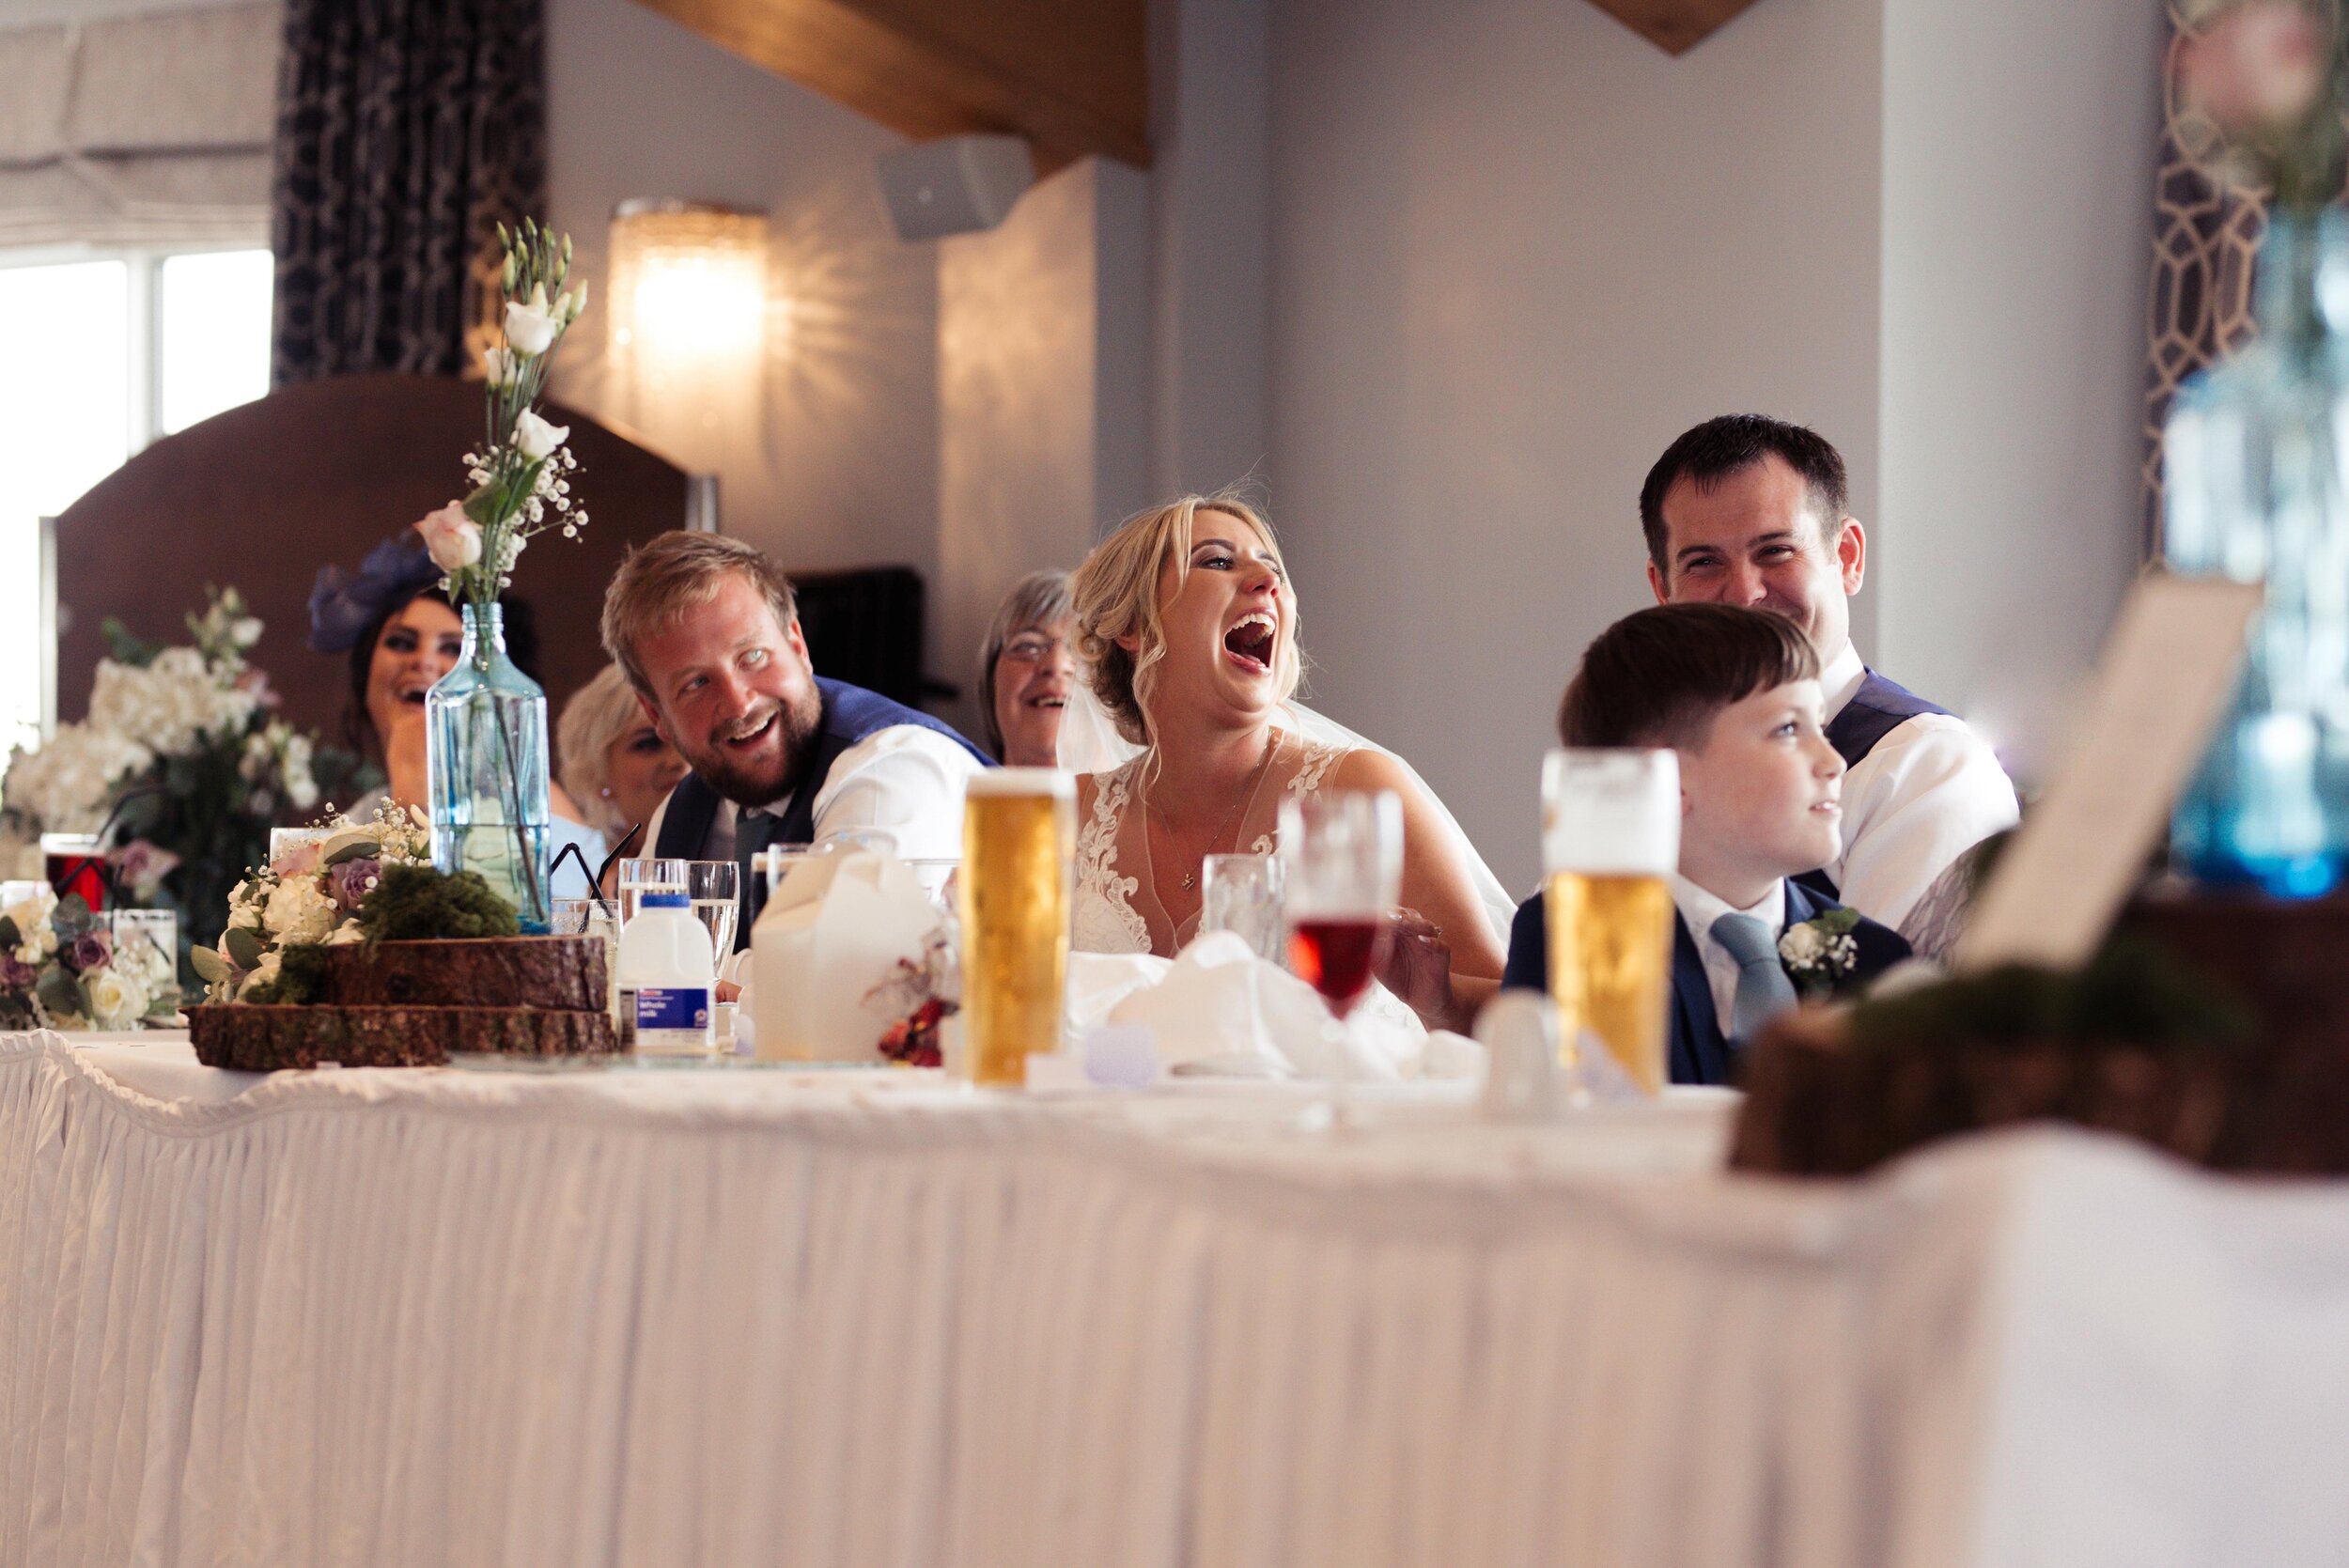 The bride has a shocked laughing face during the speeches